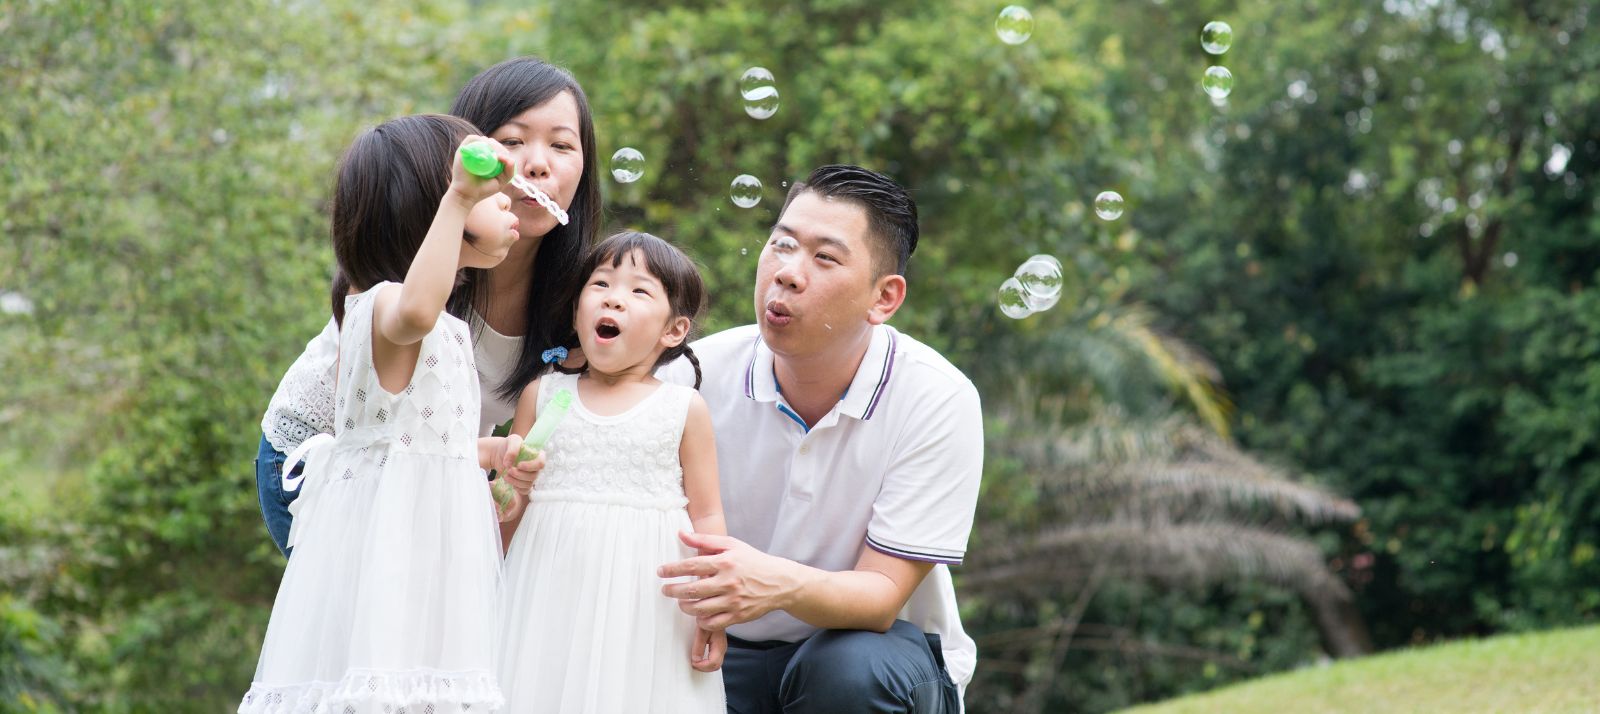 A family blowing bubbles outside.